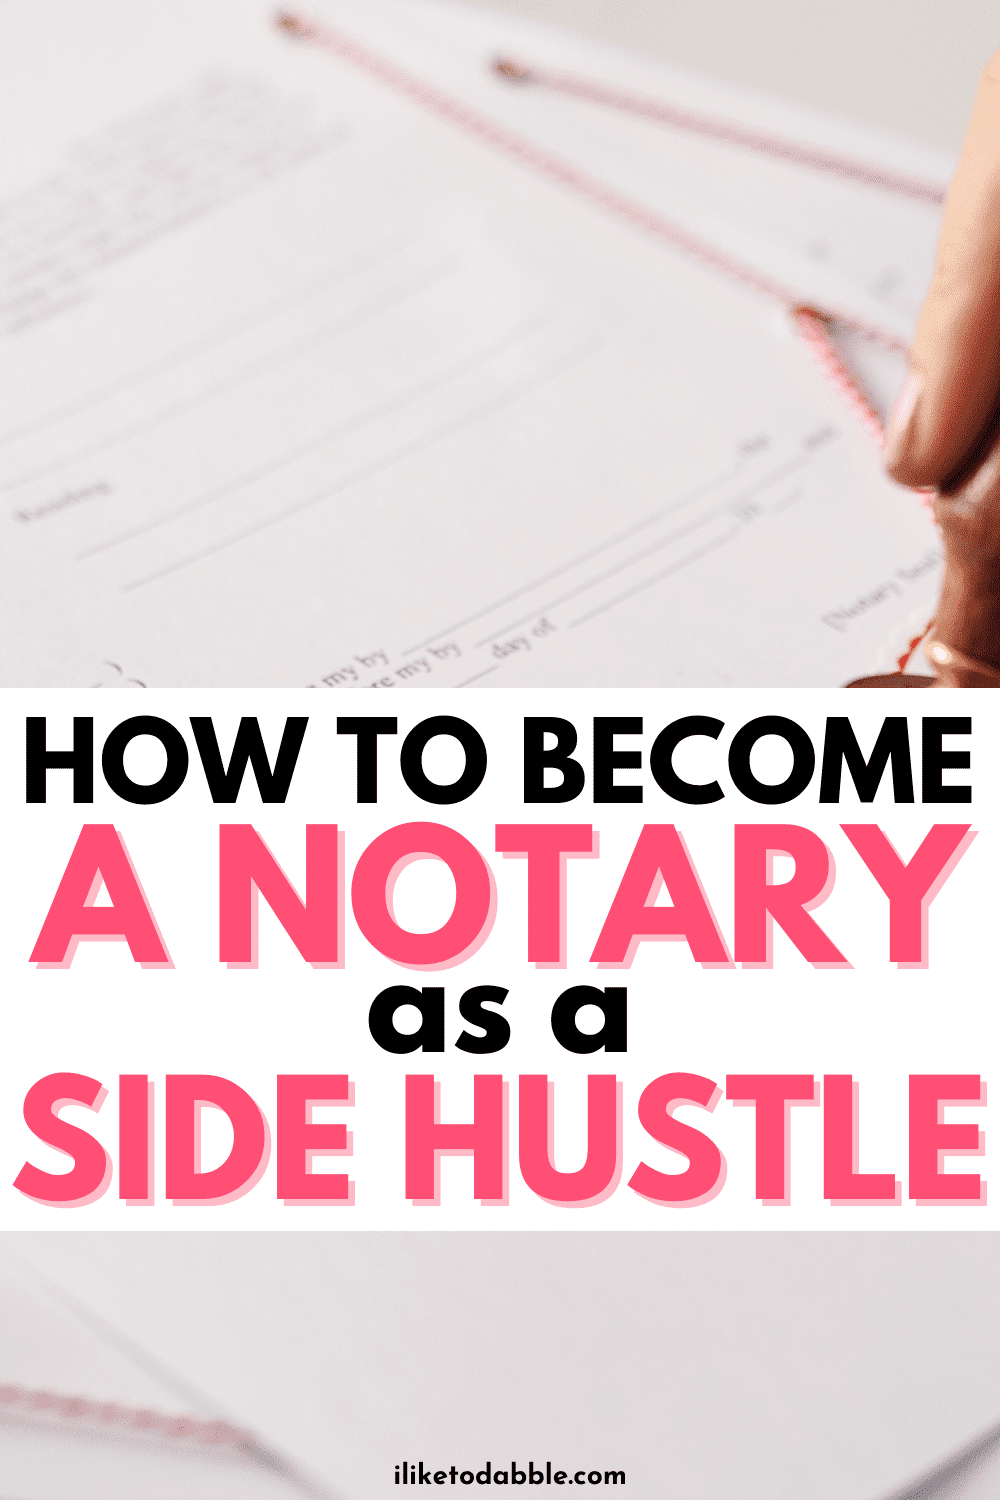 person signing something with the notary seal with text overlay that reads: how to become a notary side hustle